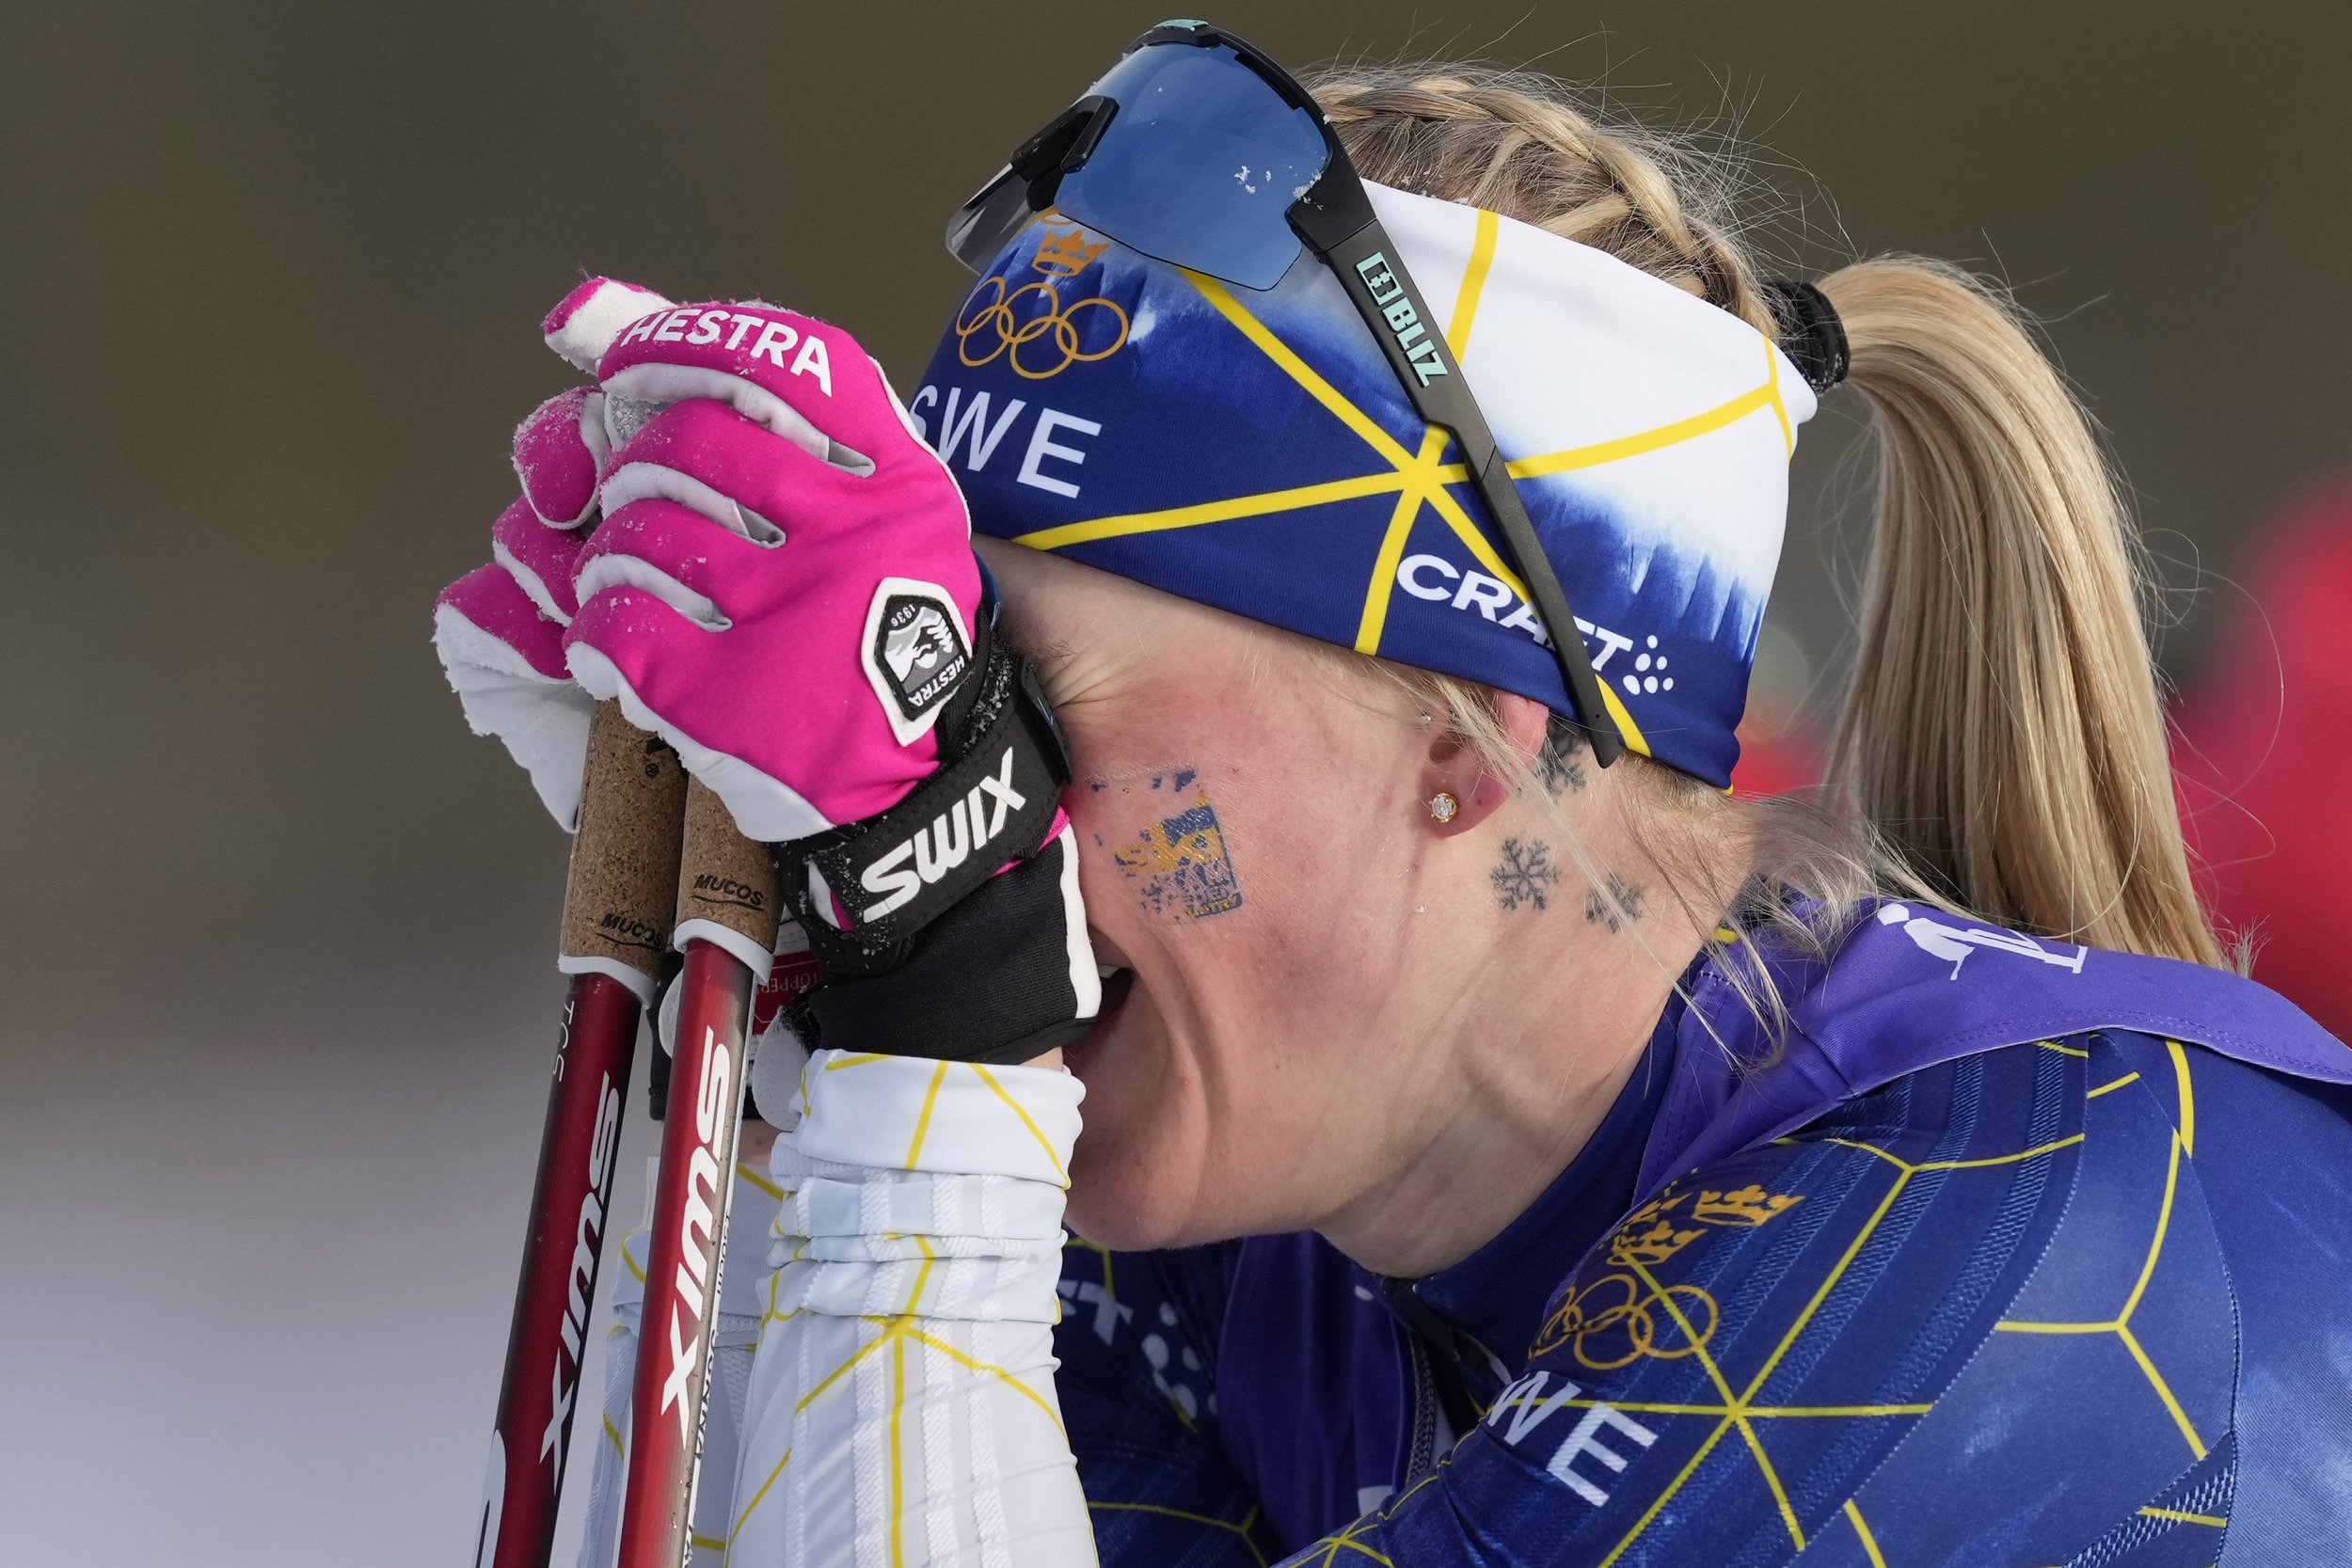  Jonna Sundling, of Sweden, reacts after winning the bronze medal with her team at the women's 4 x 5km relay cross-country skiing competition at the 2022 Winter Olympics, Saturday, Feb. 12, 2022, in Zhangjiakou, China. (AP Photo/Aaron Favila) 